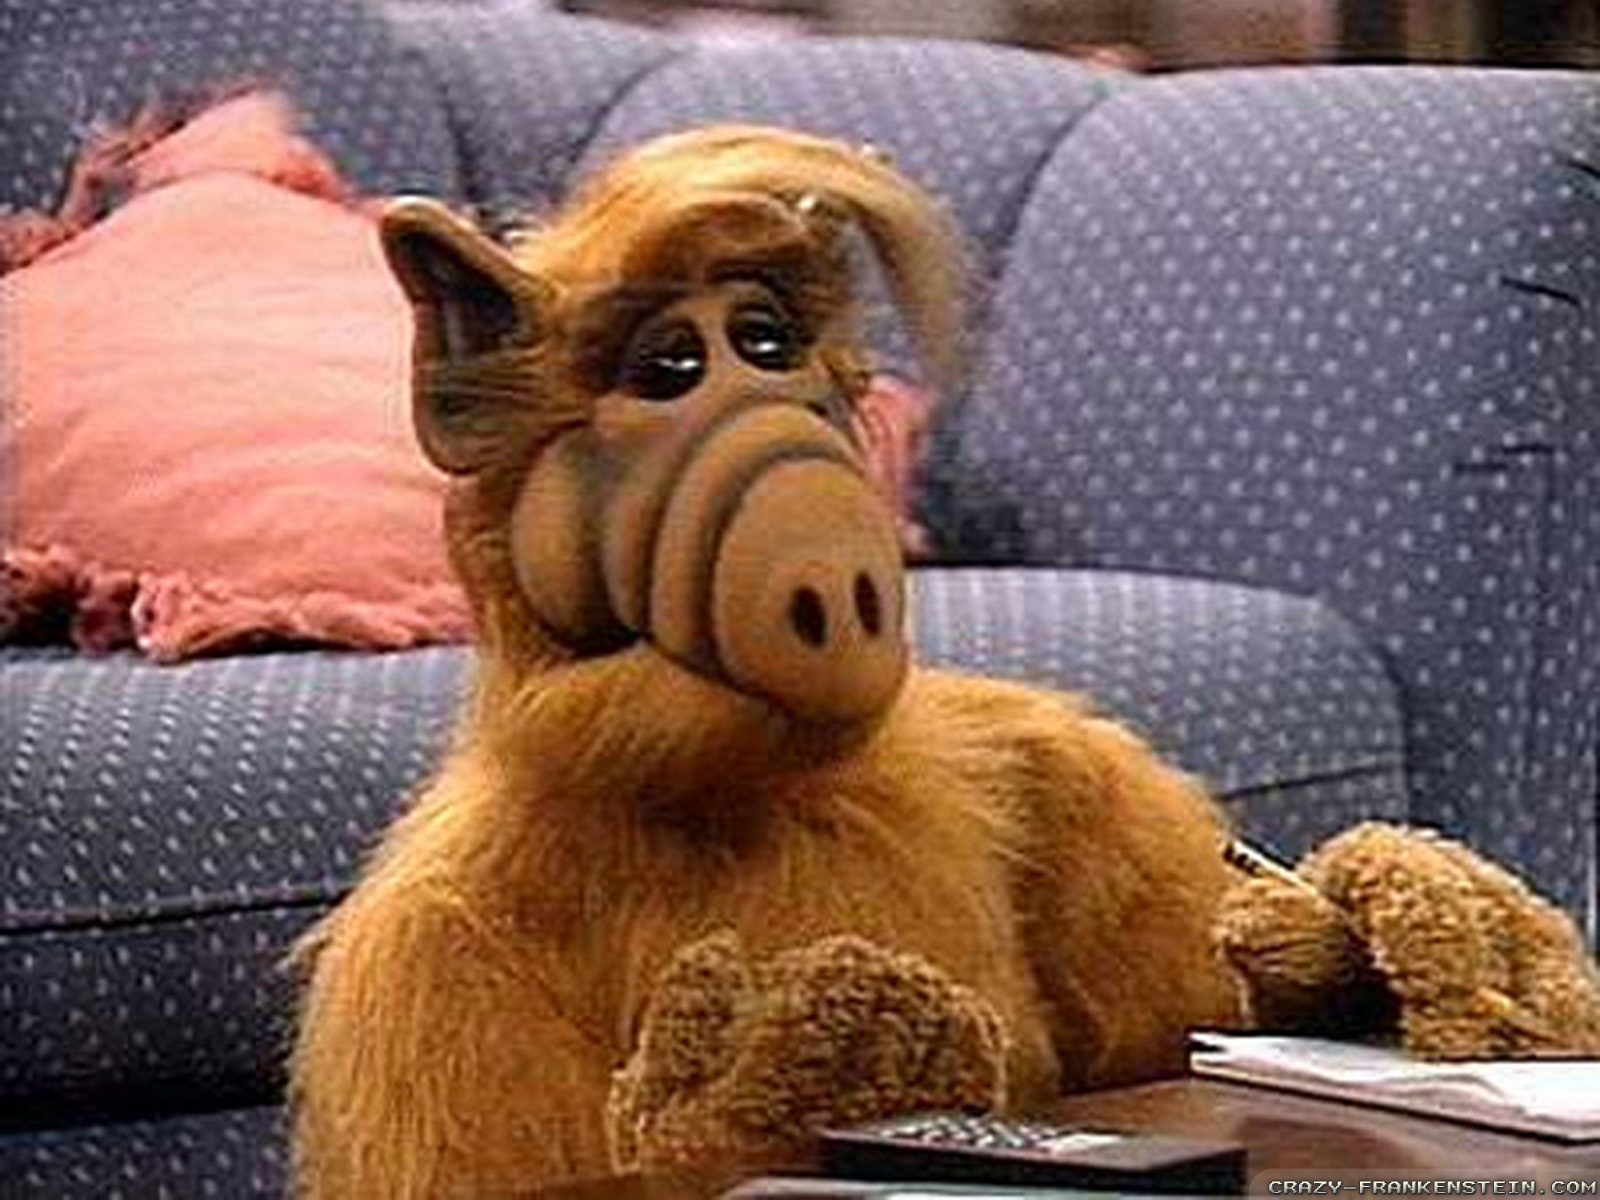 ALF - In the series finale, ALF is trying to contact Australia on the radio when he stumbles across Skip and Rhonda, two surviving Melmacians who are nearing Earth. They invite ALF to go with them. As it turns out, Skip and Rhonda have purchased a new planet and are on their way there to start a new Melmac.

ALF accepts the invitation and breaks the news to the Tanner family. After throwing him a going away party, ALF sets out for the long-awaited reunion. As the alien spaceship approaches ALF, the Alien Task Force jumps in and captures him. As the episode closes, the spaceship flies away and ALF is left in the hands of the dissection-friendly military.